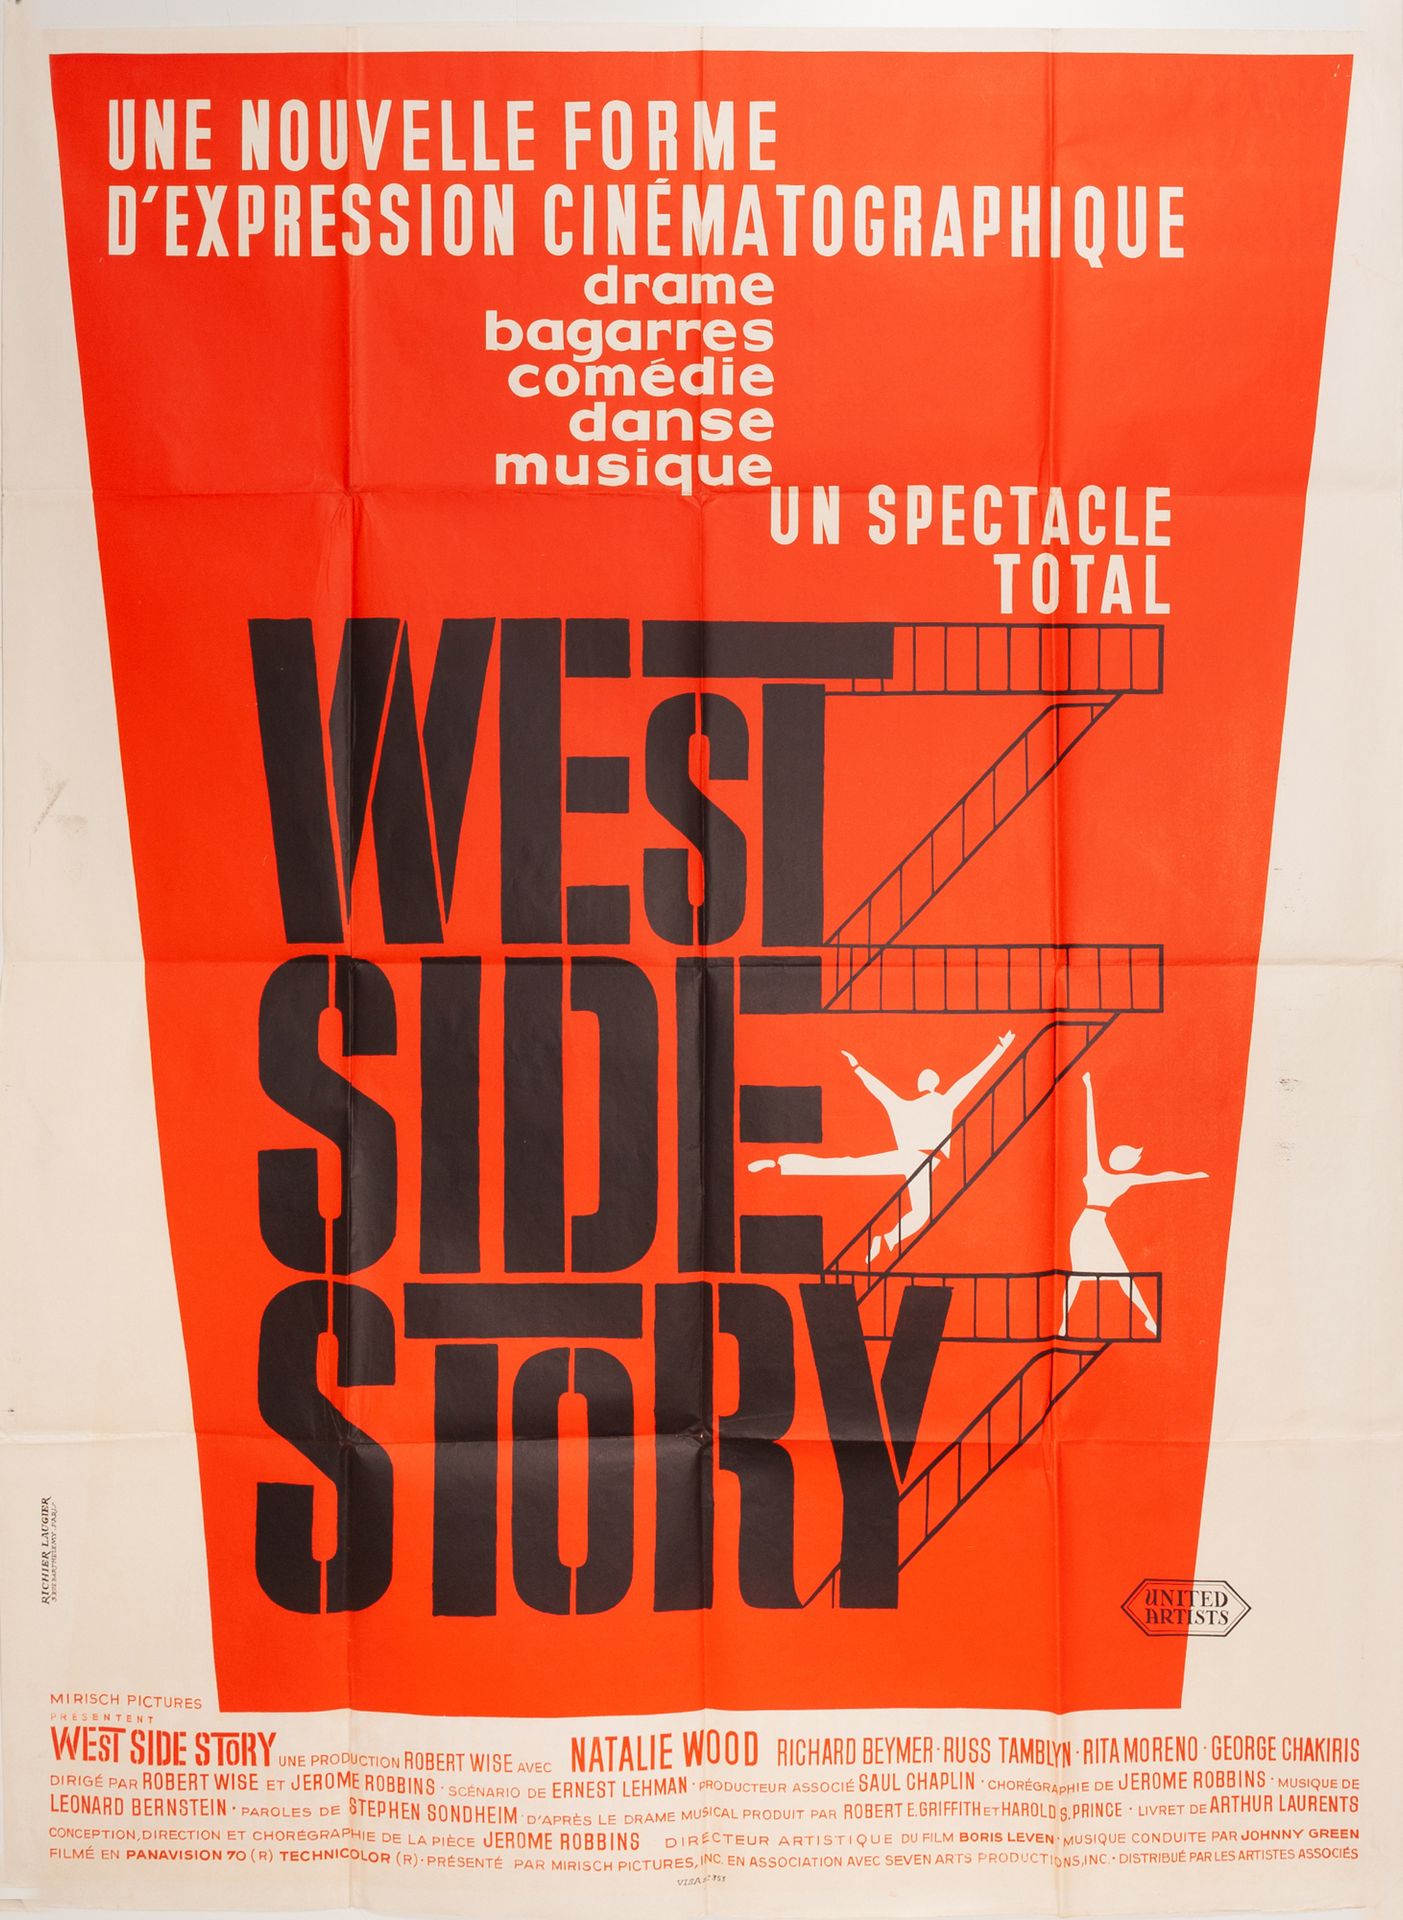 Null WEST SIDE STORY Robert Wise. 1961.
120 x 160 cm. French poster. Unsigned (A&hellip;